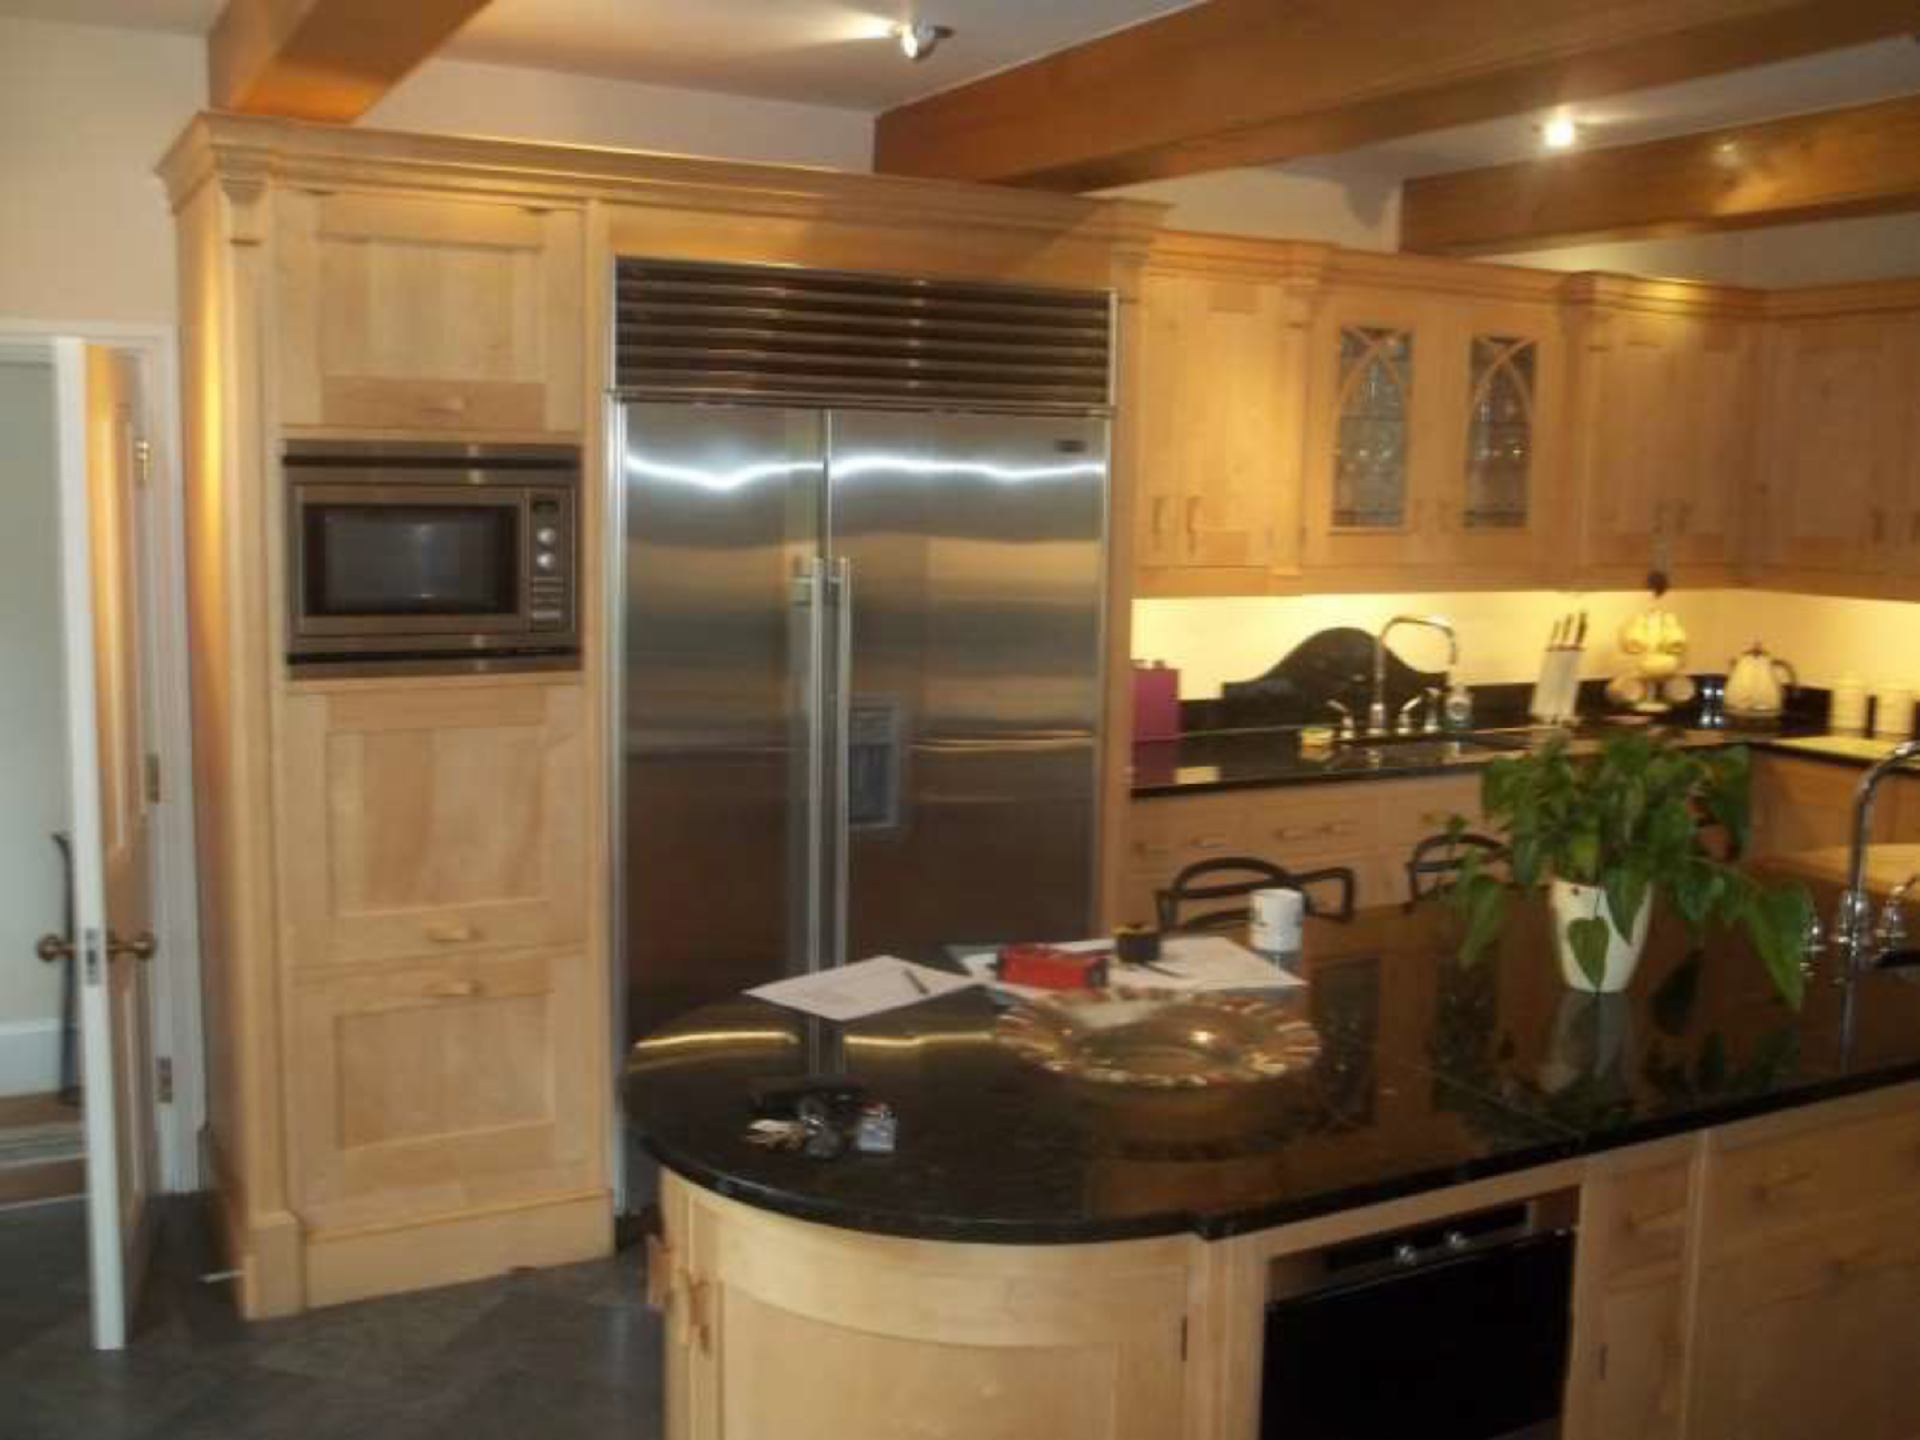 Luxury Used Mark Wilkinson Maple "Mai" Kitchen Complete with Aga and Miele Appliances - Image 2 of 14